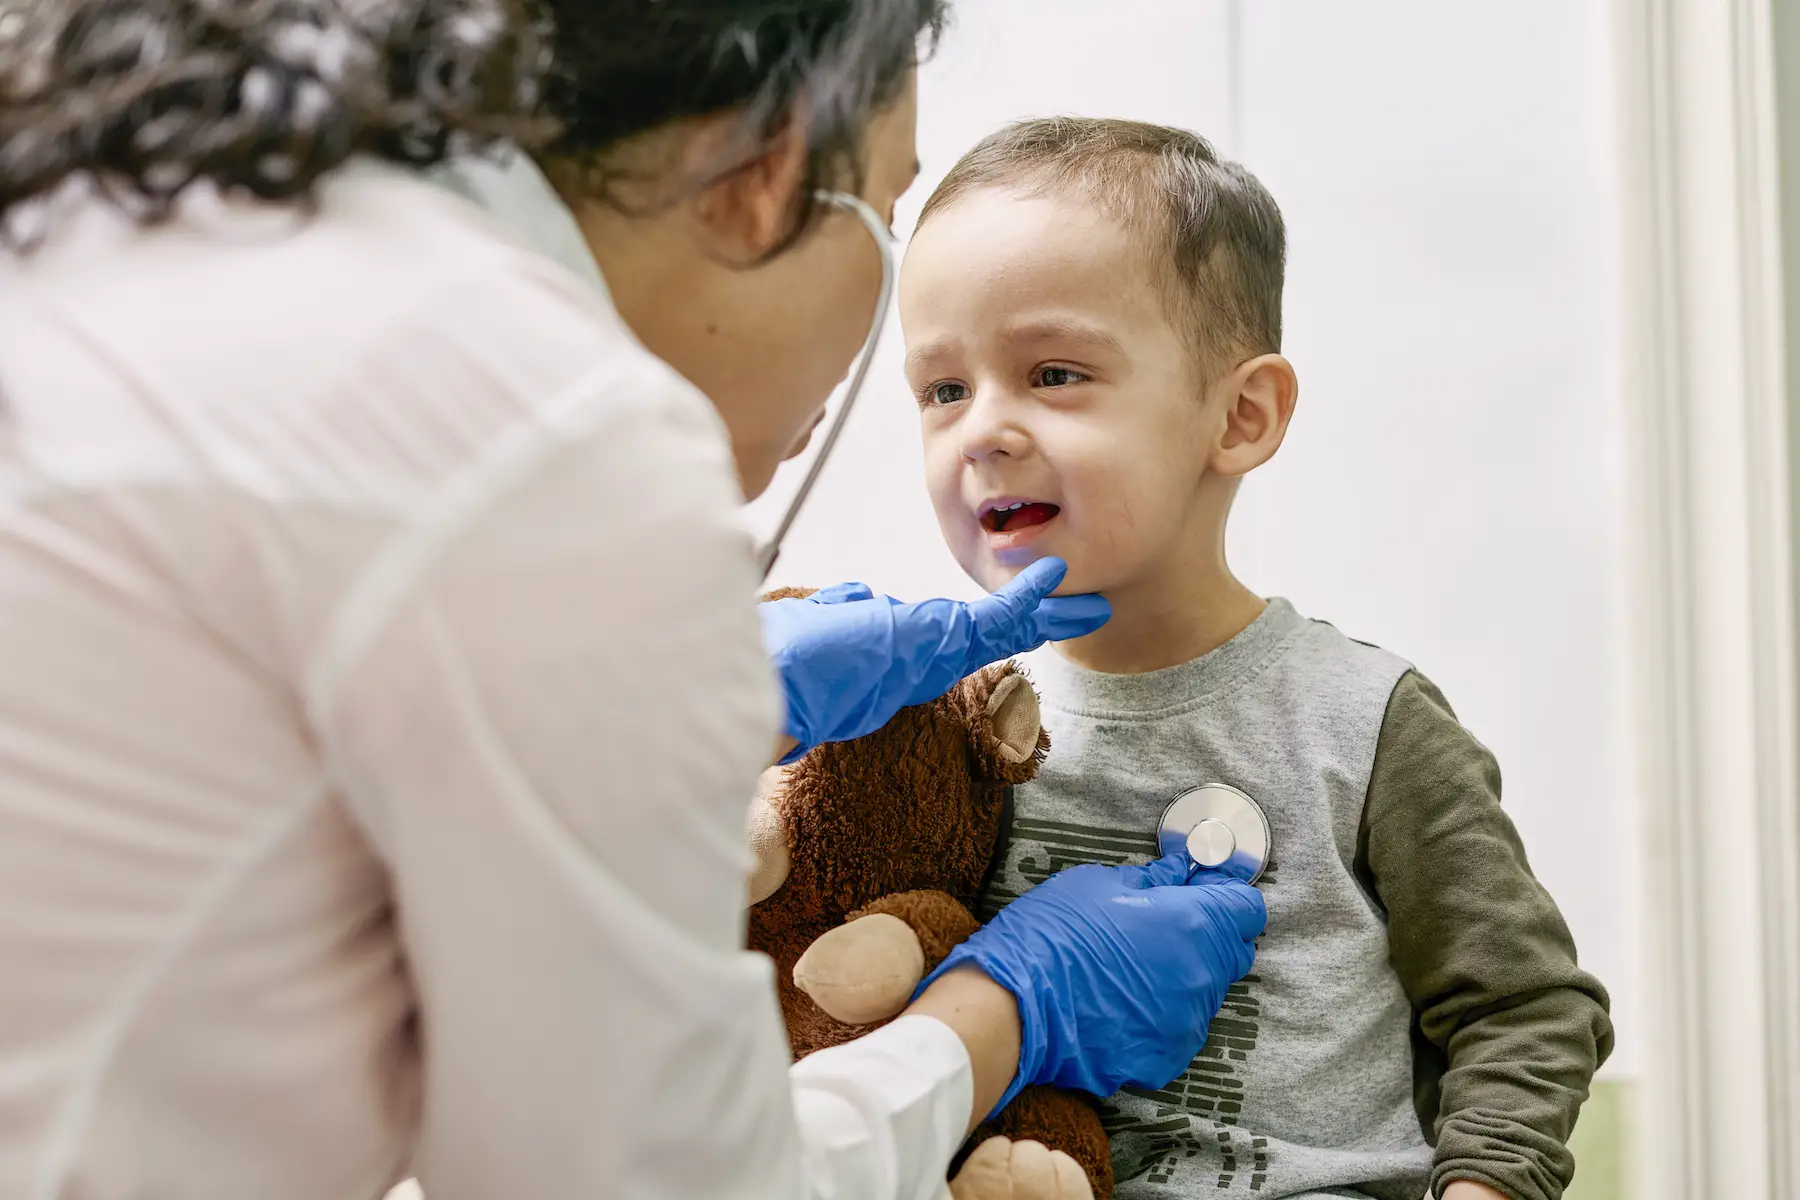 A little boy holds a teddy bear and opens his mouth at the pediatrician who is listening to his heart with a stethoscope.